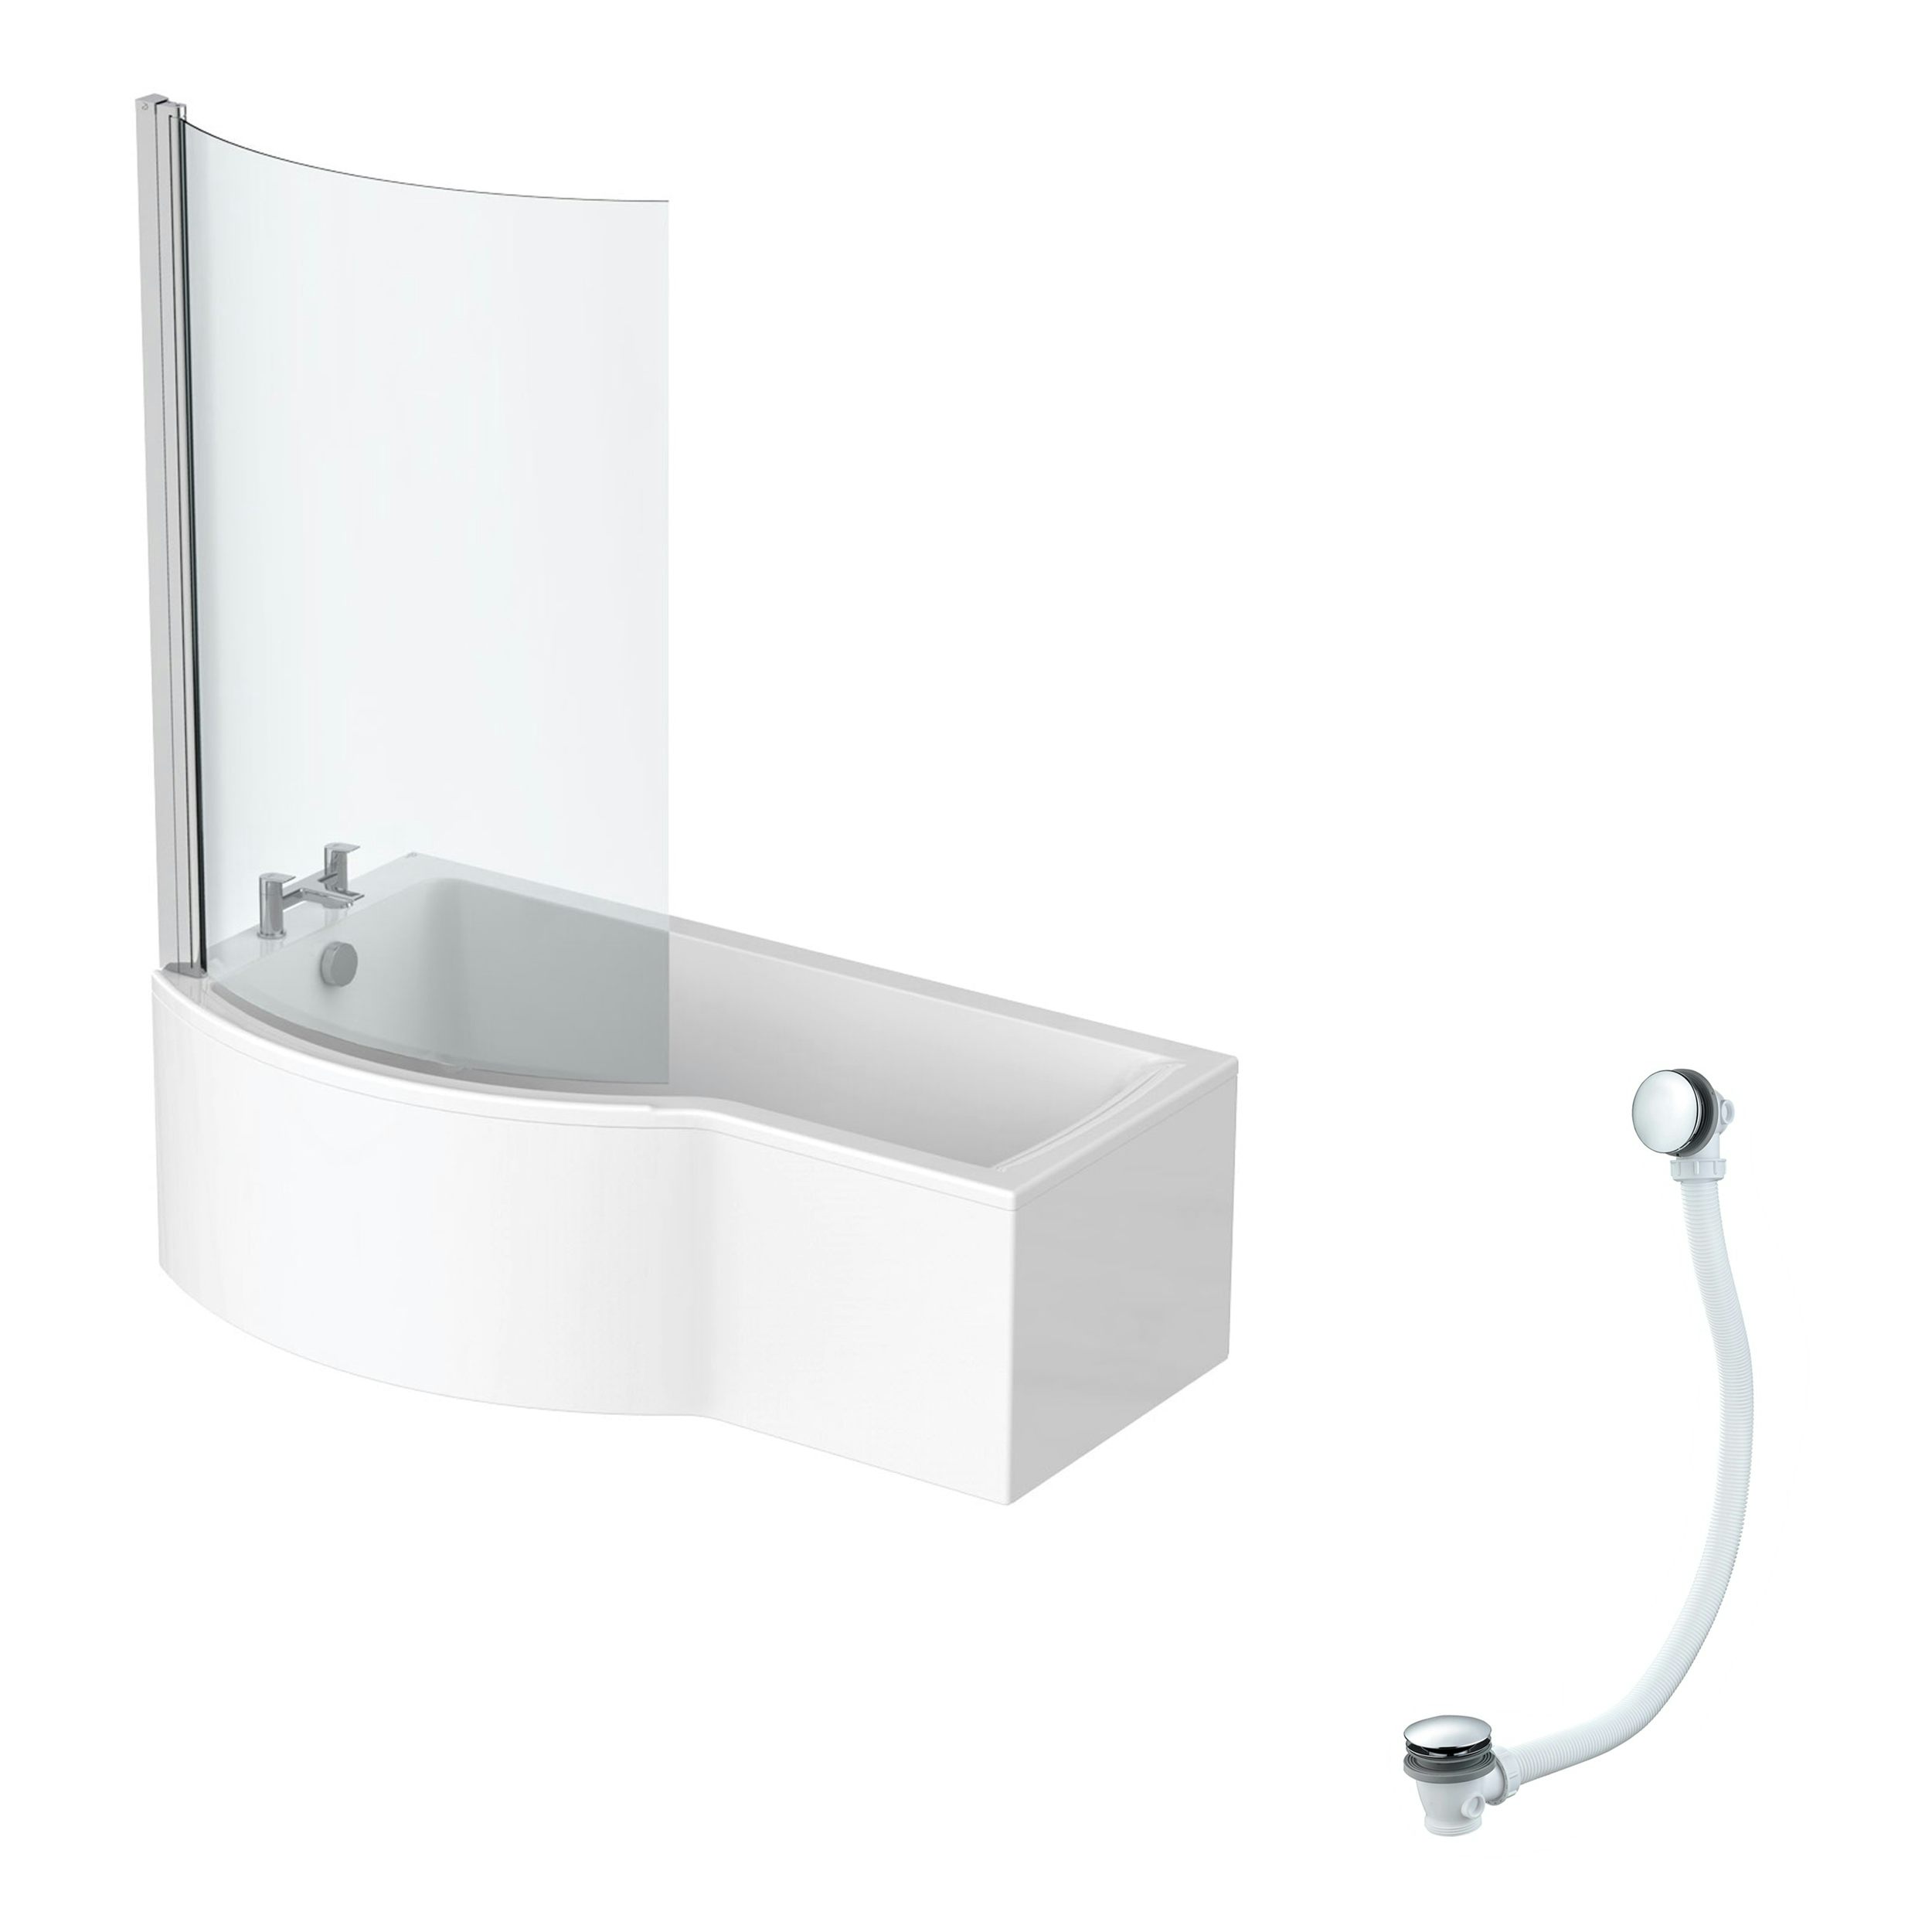 Ideal Standard Connect Air left hand shower bath with bath screen and front panel 1700 x 900 with free bath waste